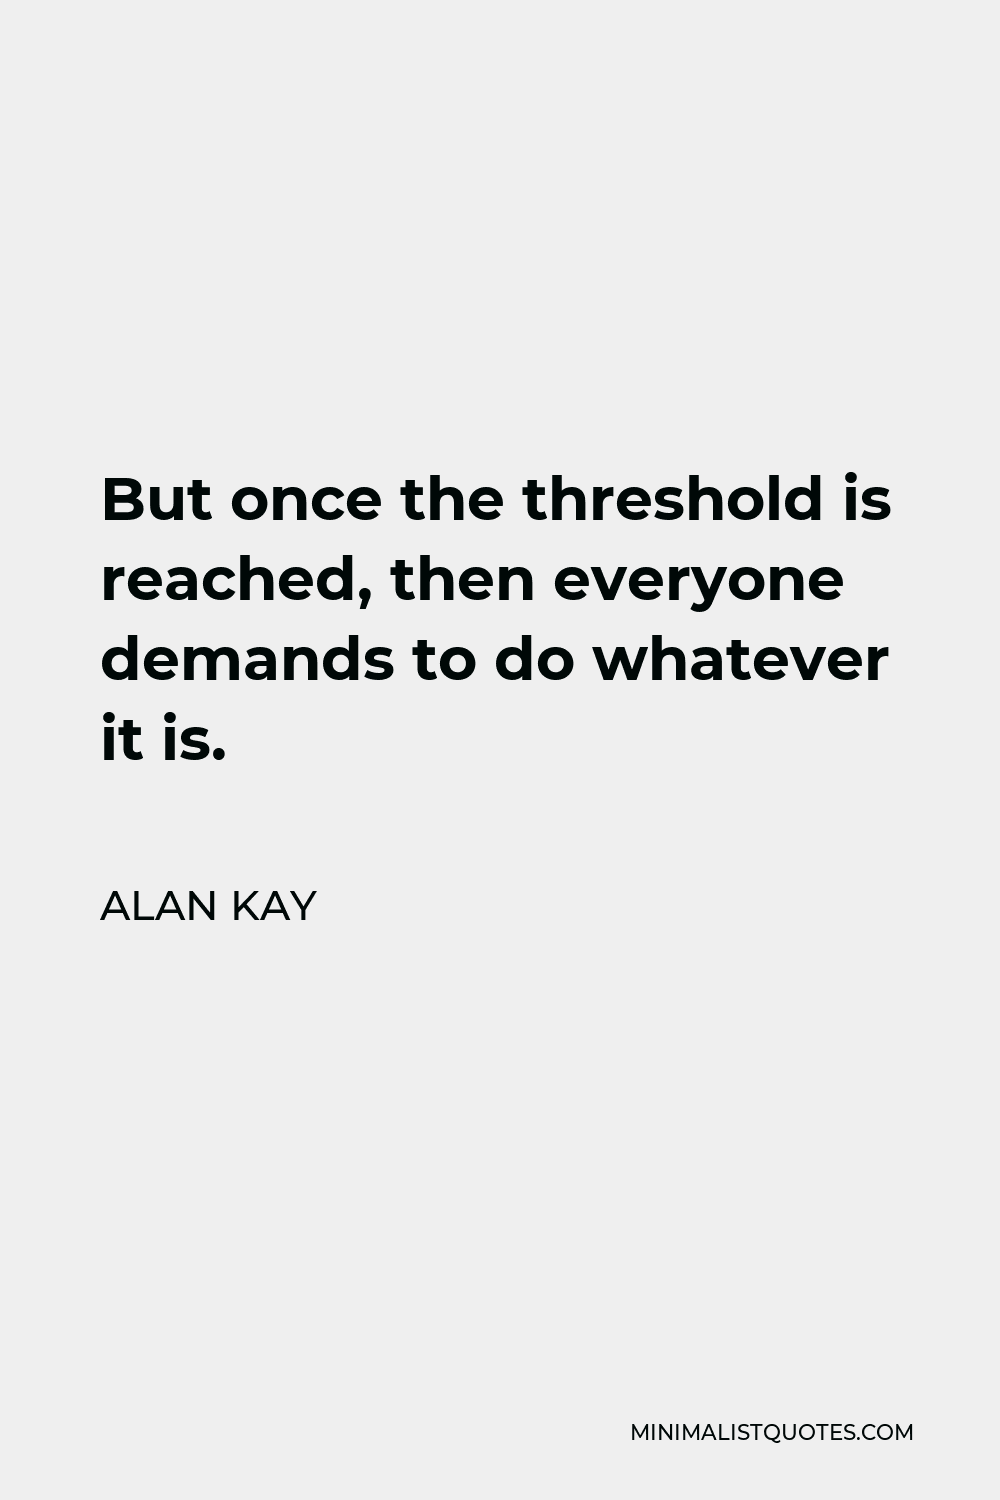 Alan Kay Quote - But once the threshold is reached, then everyone demands to do whatever it is.